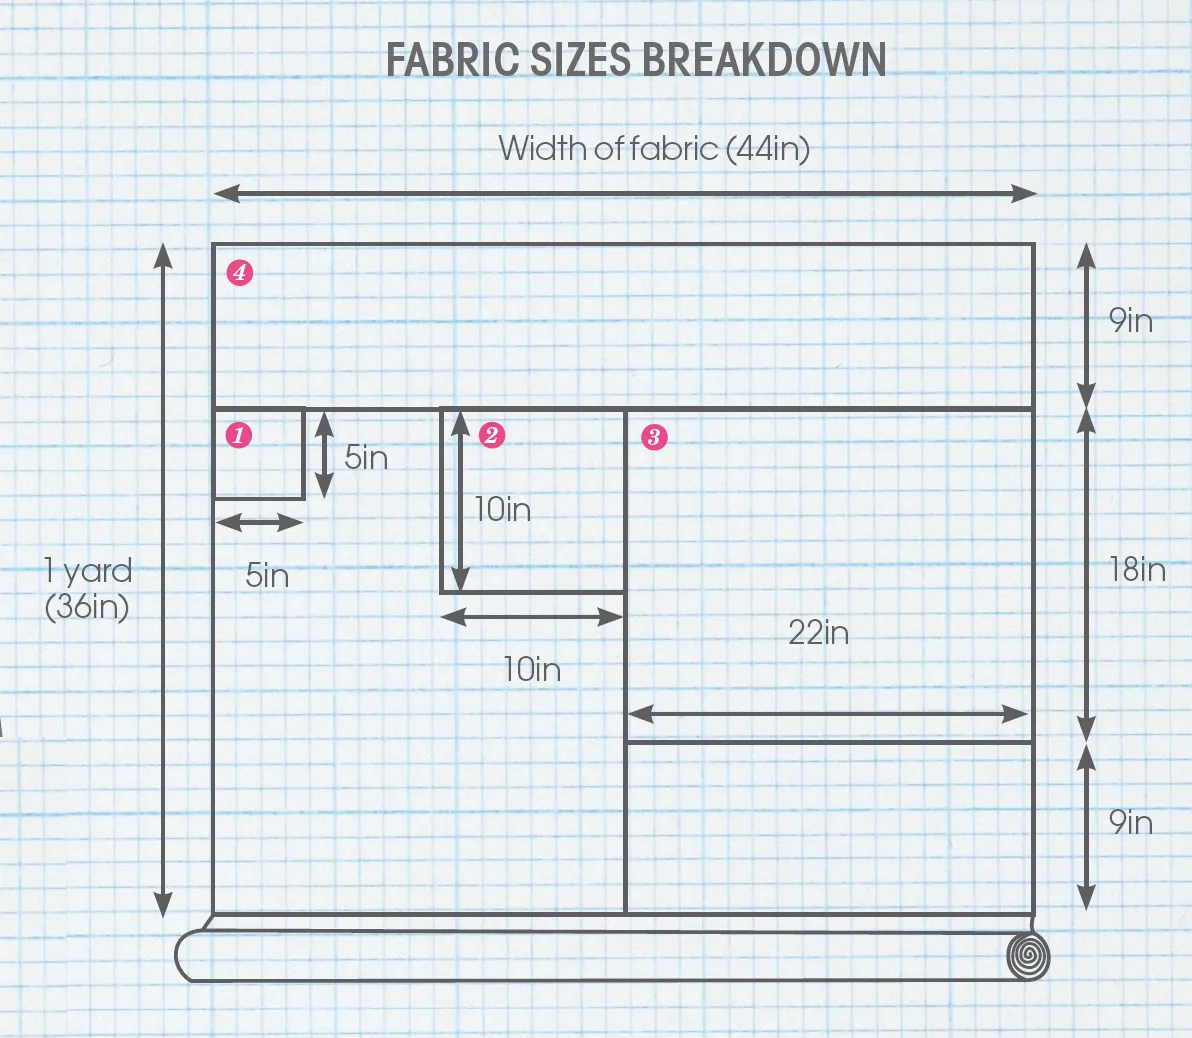 Guide to standard fabric sizes for quilting